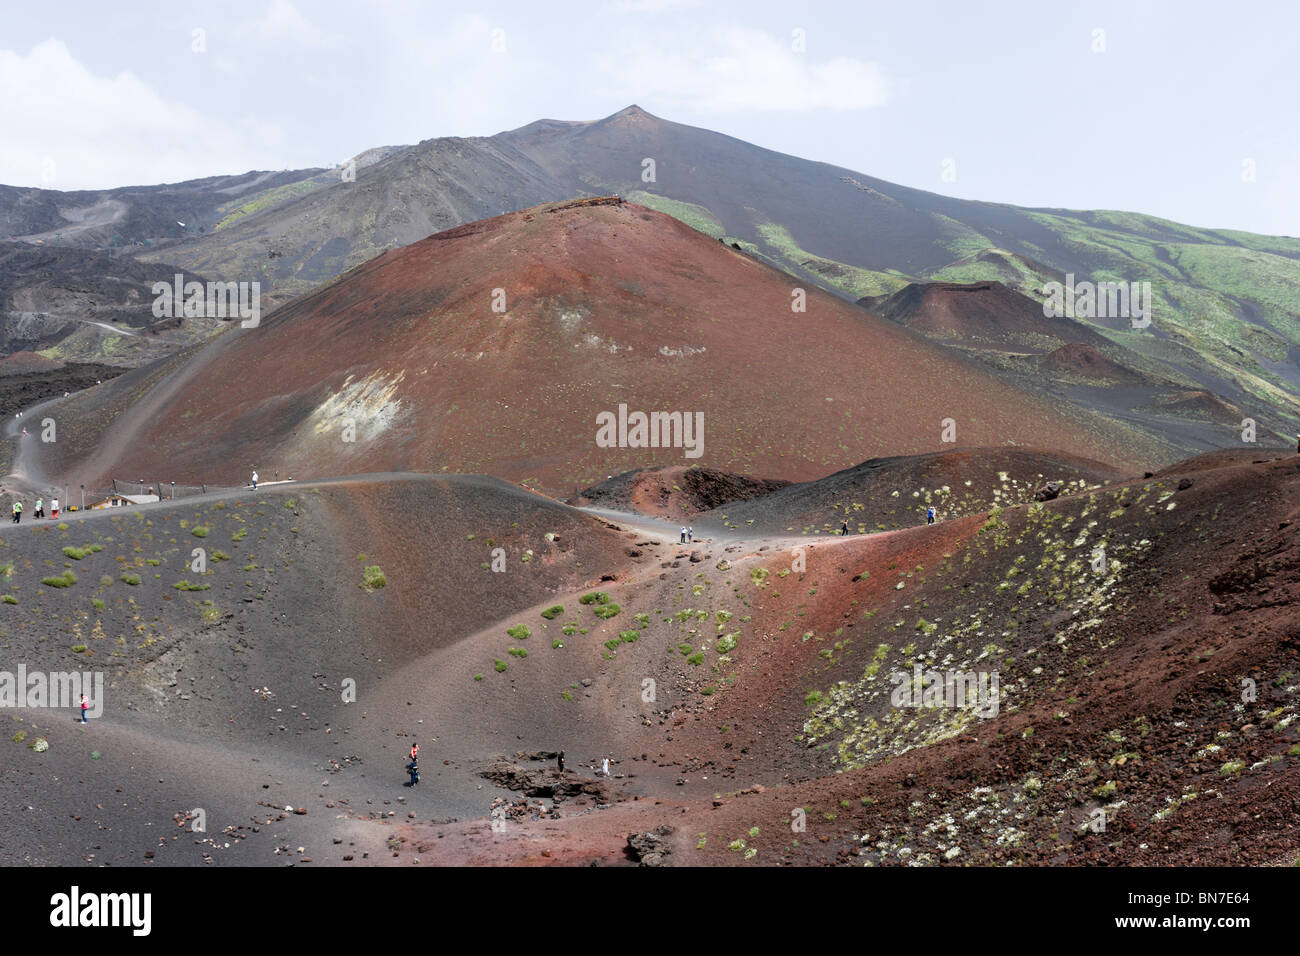 A crater near the Rifugio Sapienza on the southern slopes looking towards the summit, Mount Etna, Sicily, Italy Stock Photo